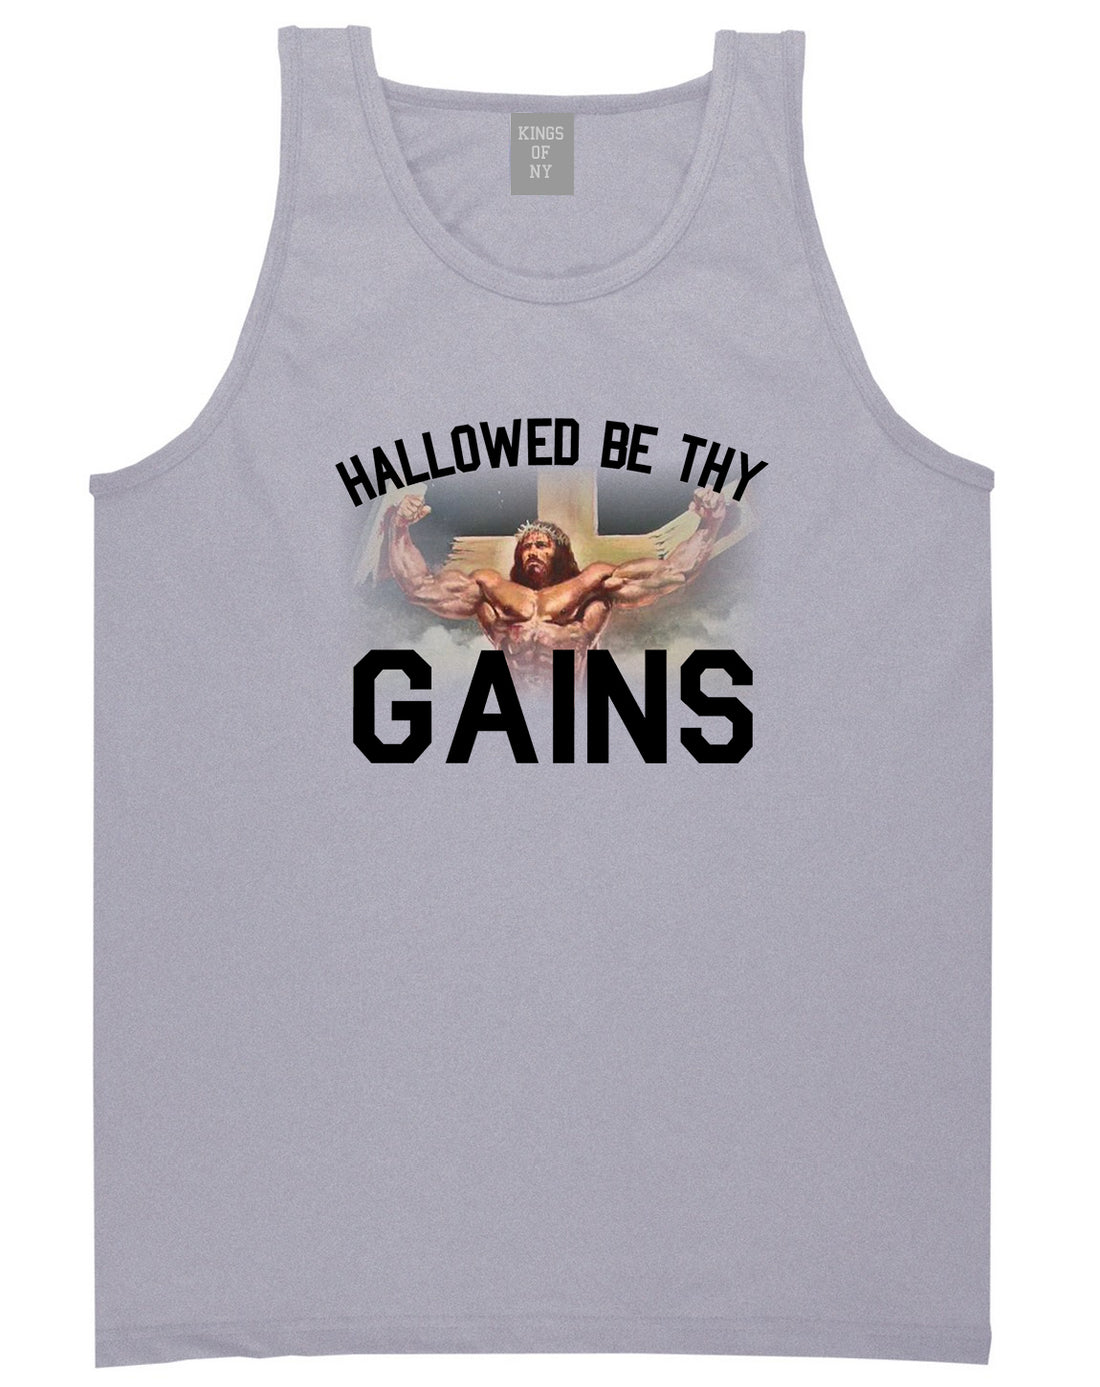 Hallowed Be Thy Gains Jesus Work Out Mens Tank Top Shirt Grey